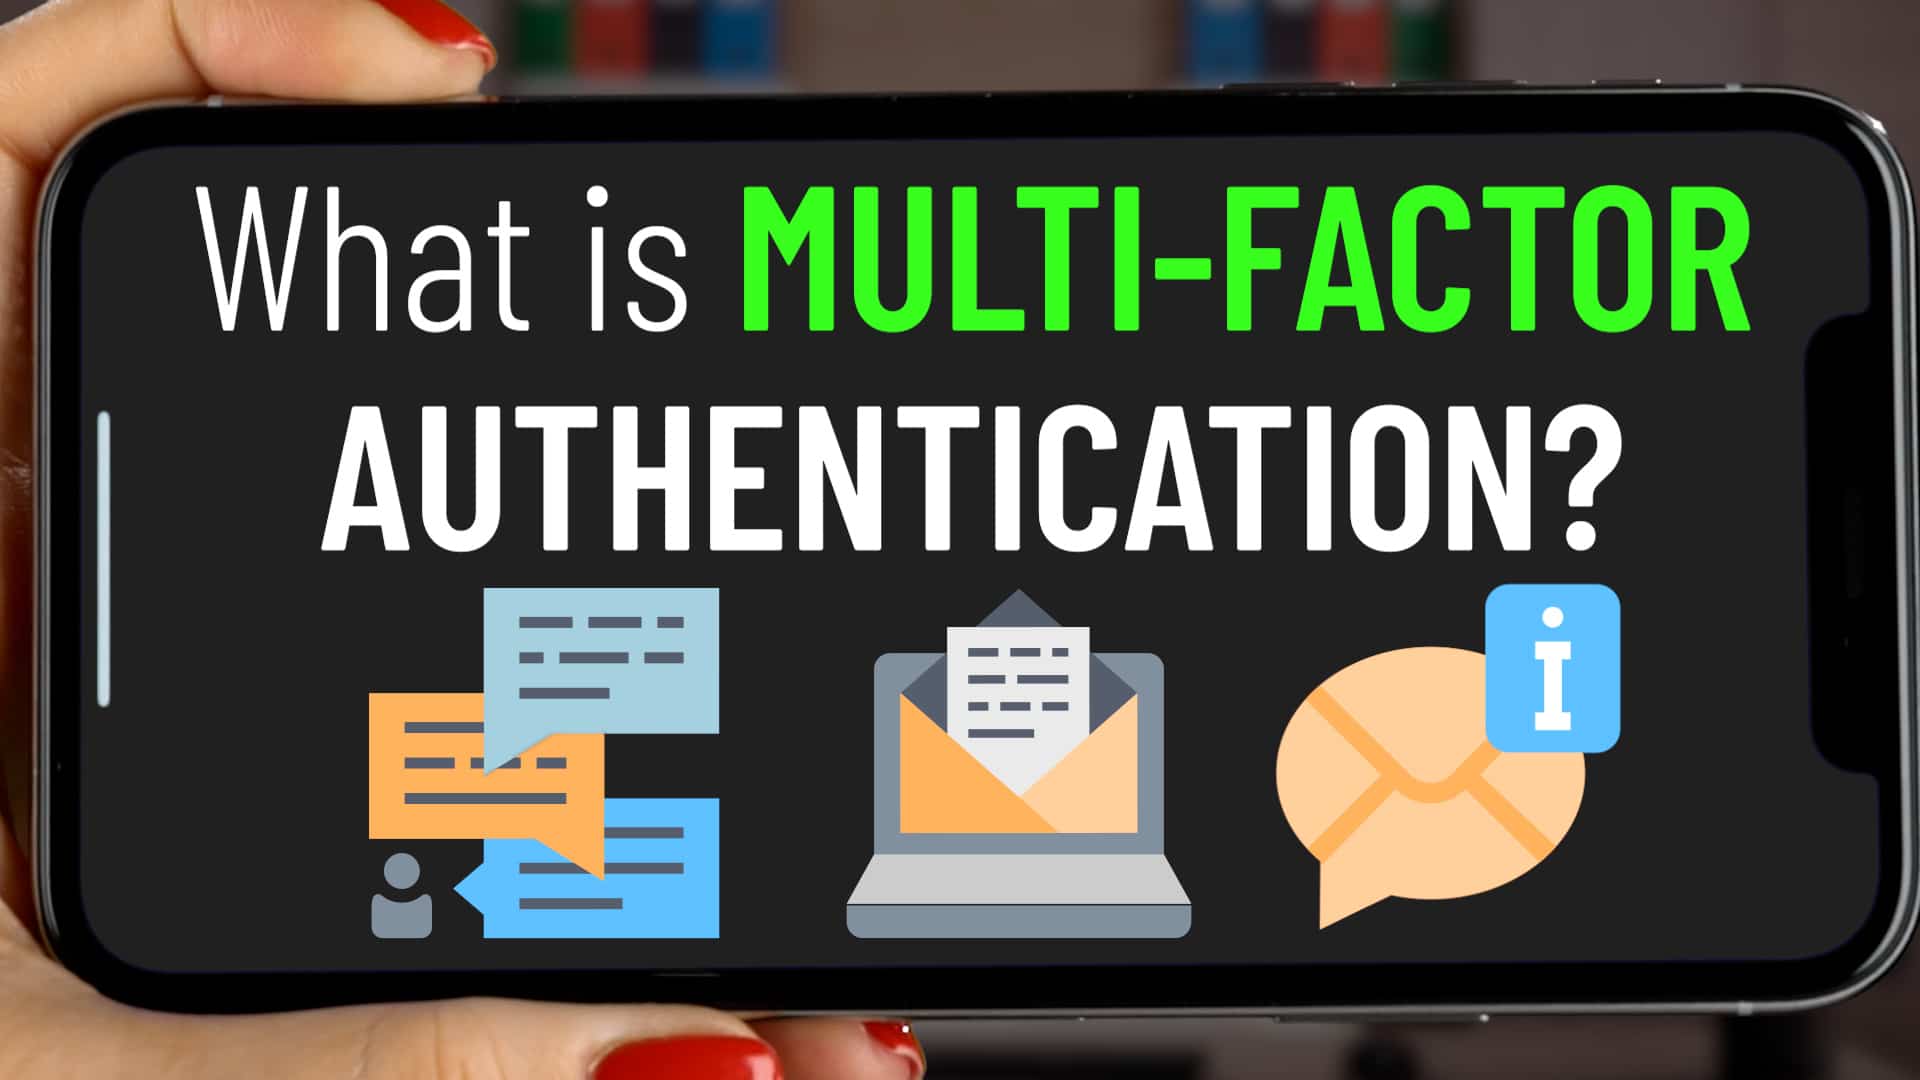 What is multi-factor authentication?